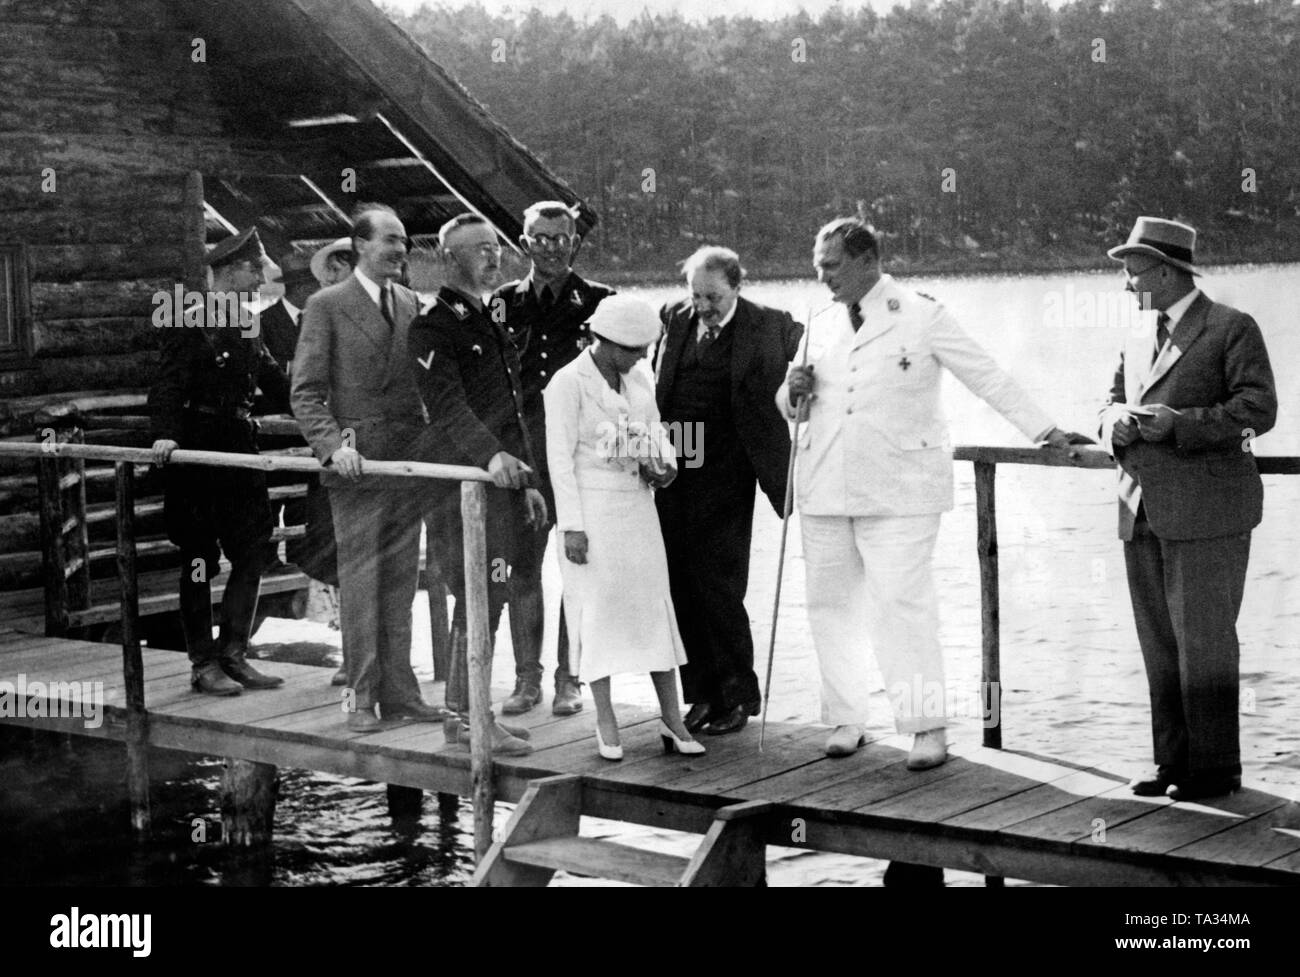 The Queen of Siam Rambai Barni visits Hermann Goering (2nd from right) on his estate Carinhall. Here they stand on a bathing jetty. To her left stands Erich Gritzbach, beside Heinrich Himmler. Stock Photo